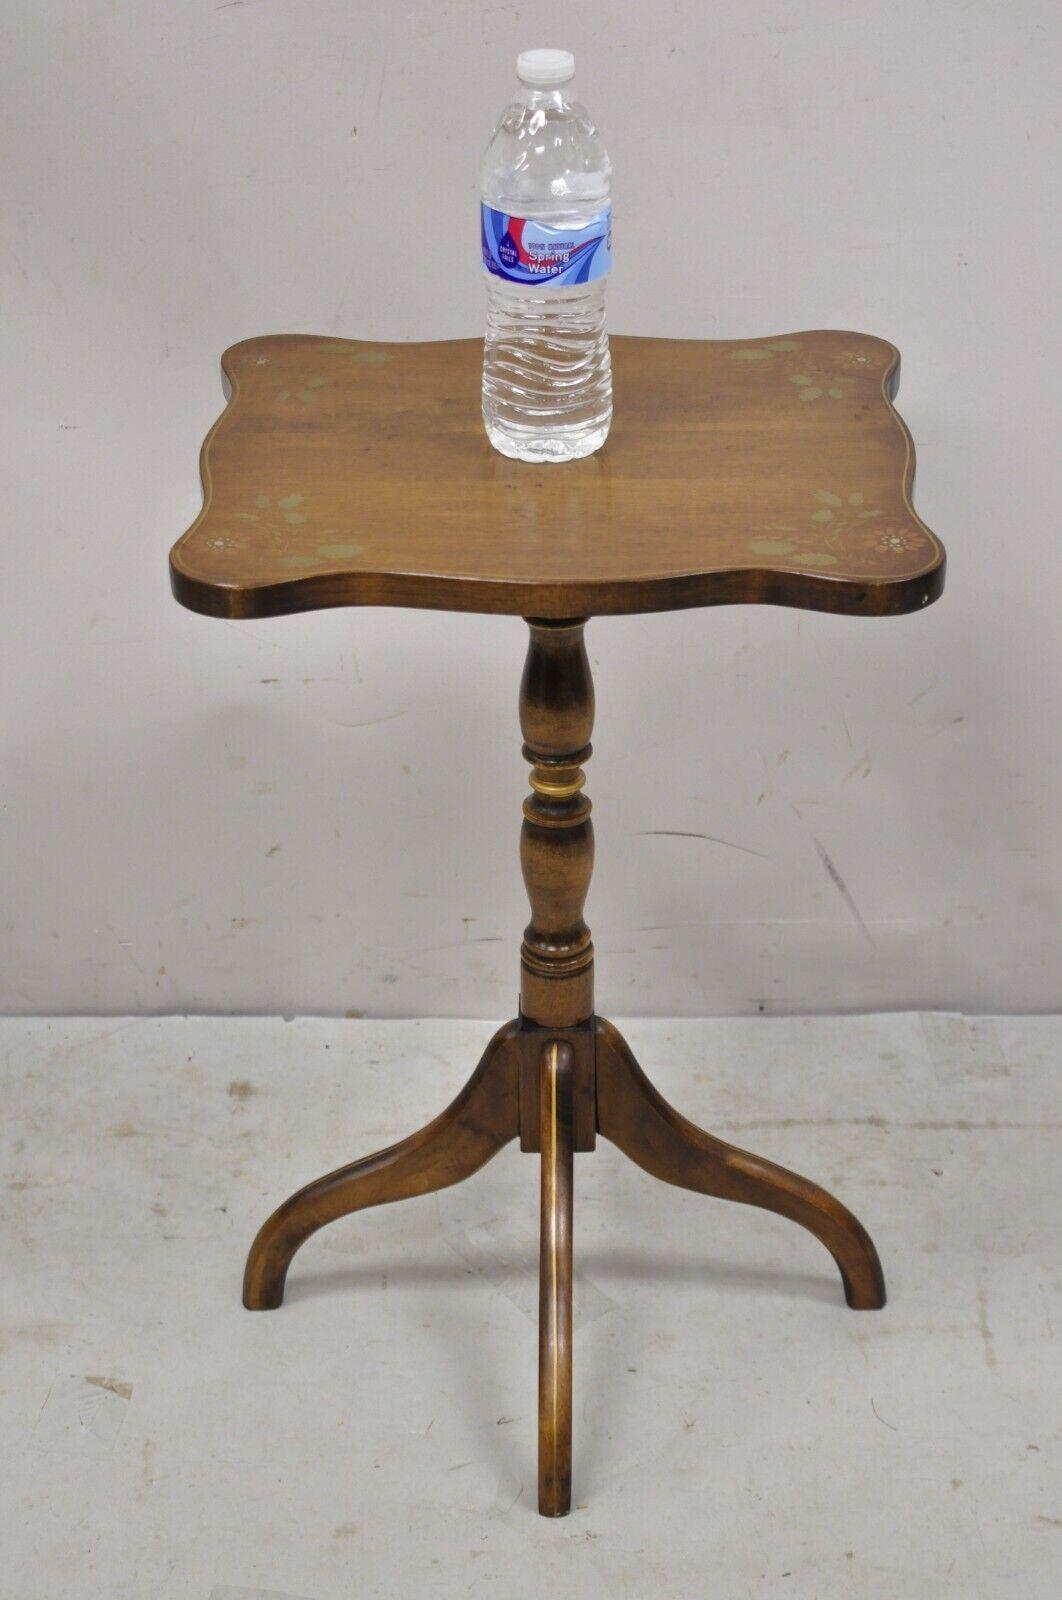 Vintage Scheibe small maple wood hitchcock style accent side table. Item features Pedestal base with 4 legs, stencil painted details to top, solid wood construction, beautiful woodgrain, original label, quality American craftsmanship. circa mid 20th